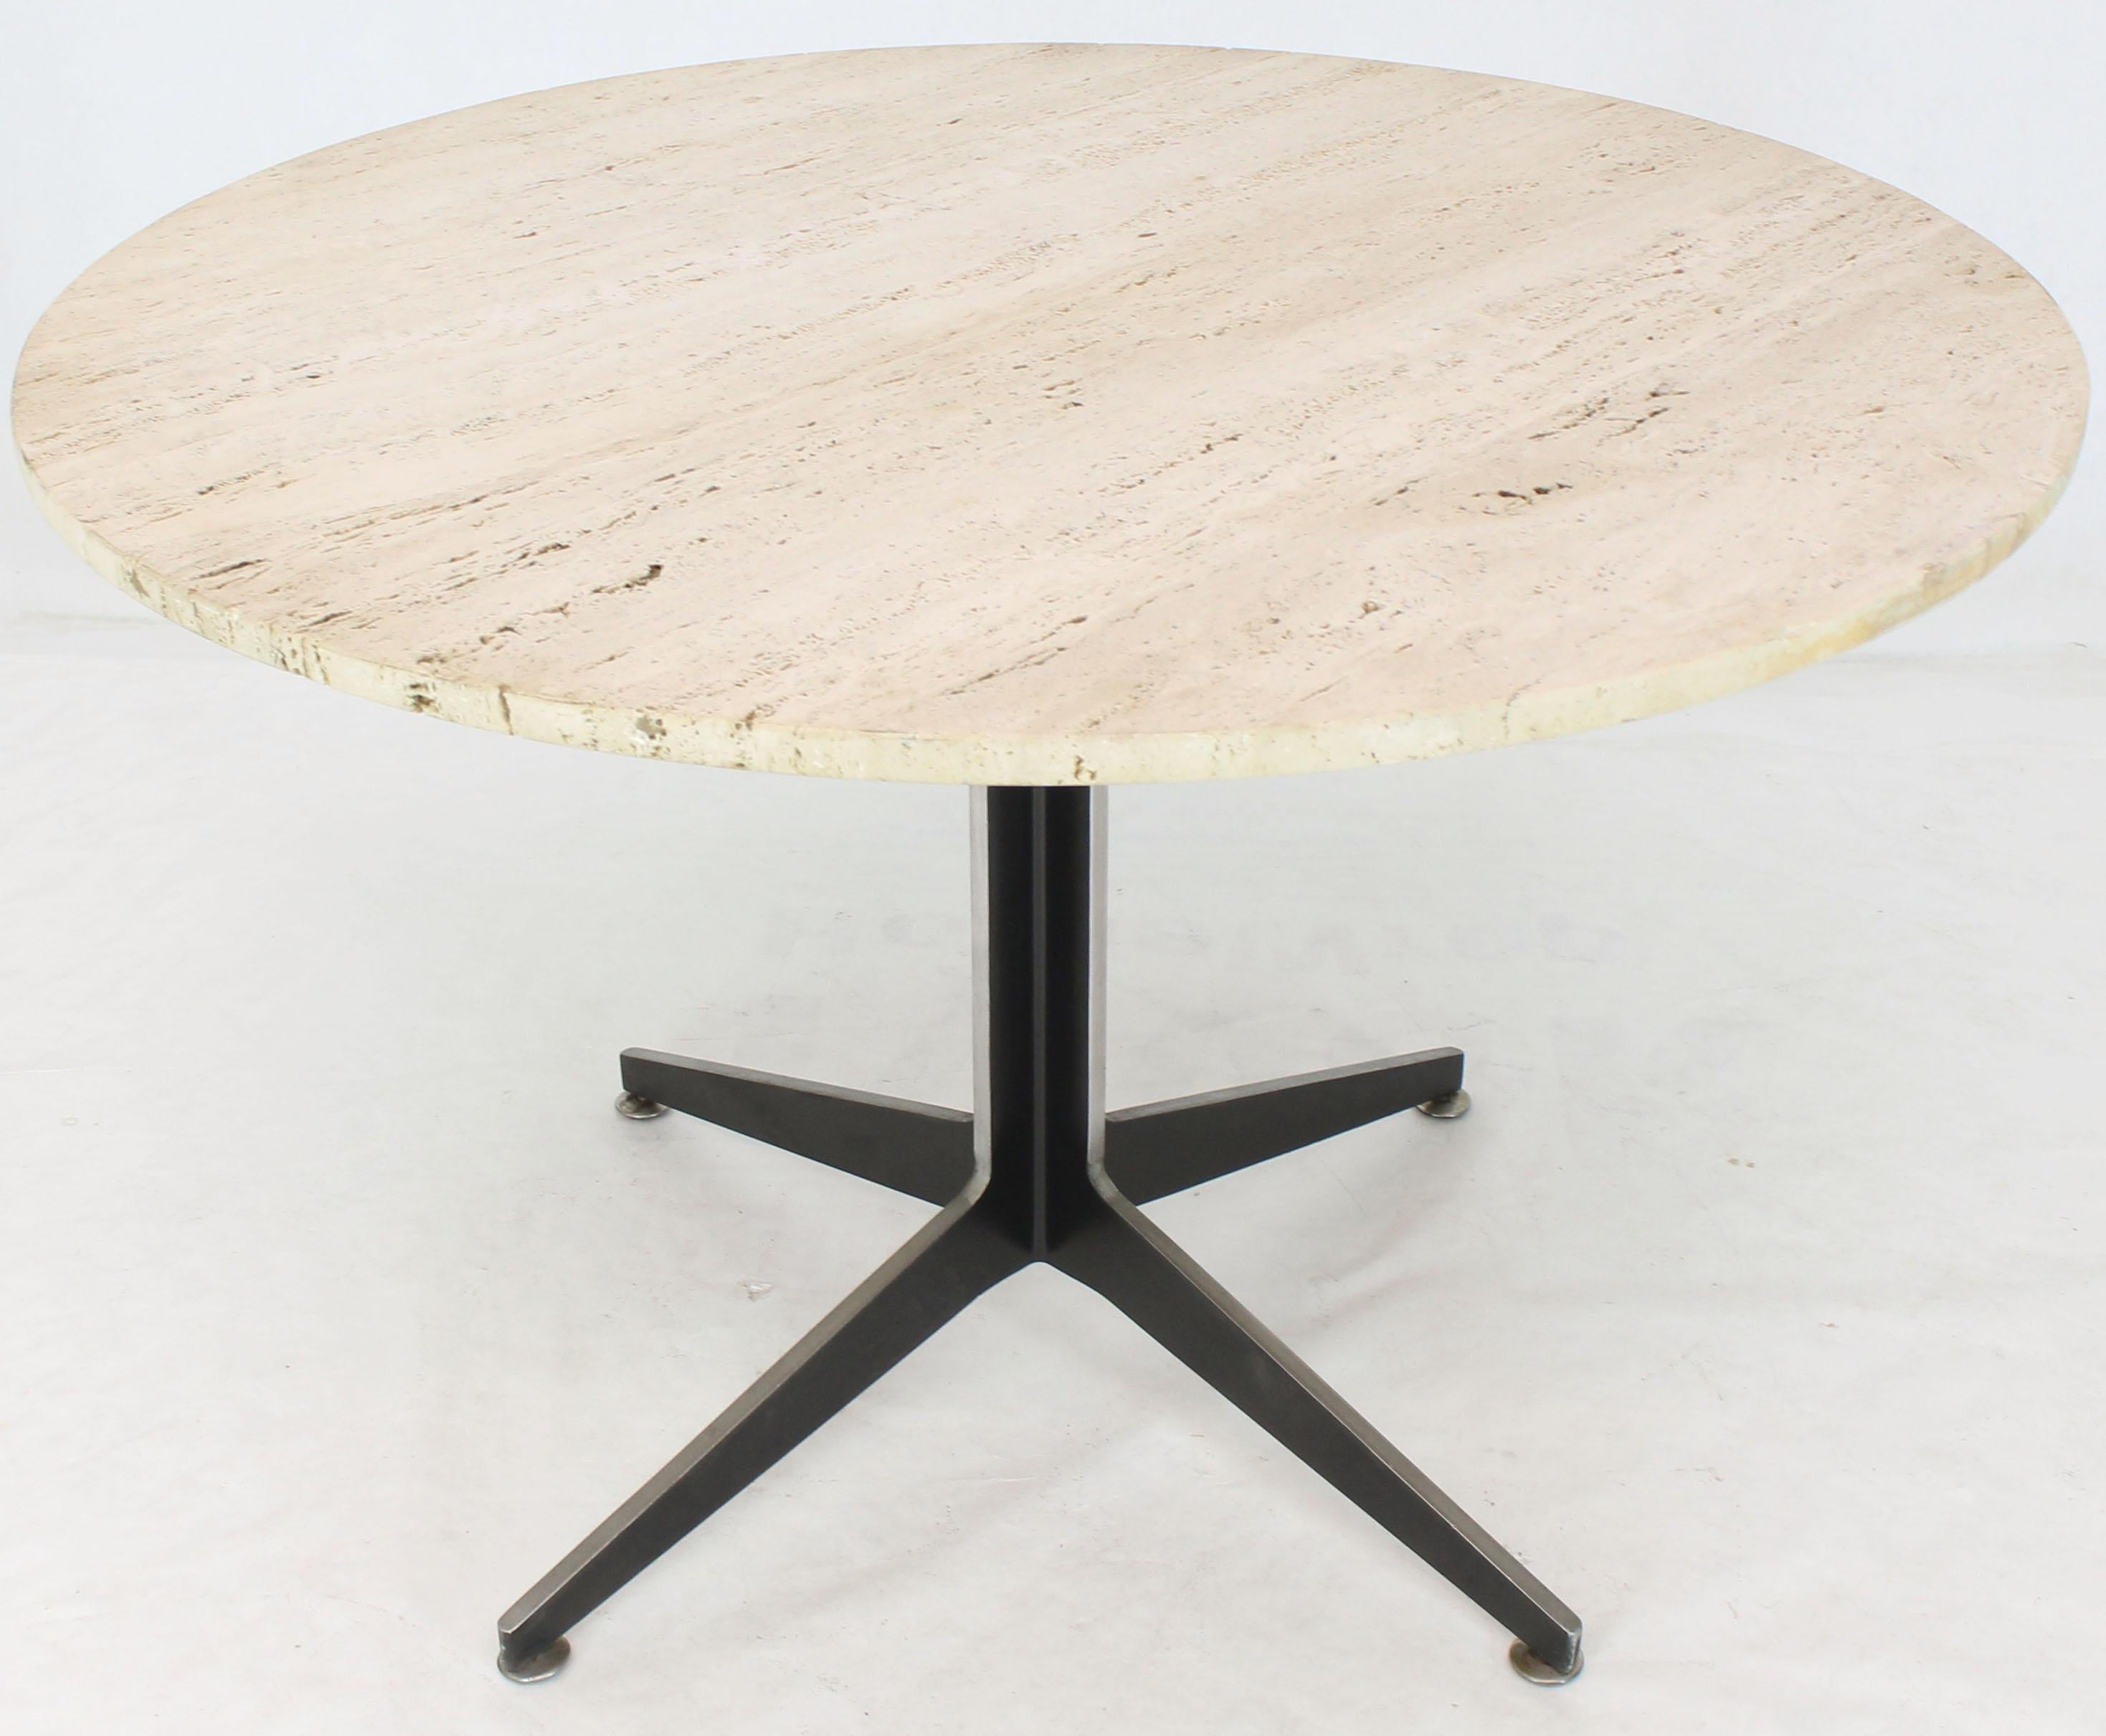 American Round Travertine Top Fabricated Aluminium X-Base Cafe Dining Table